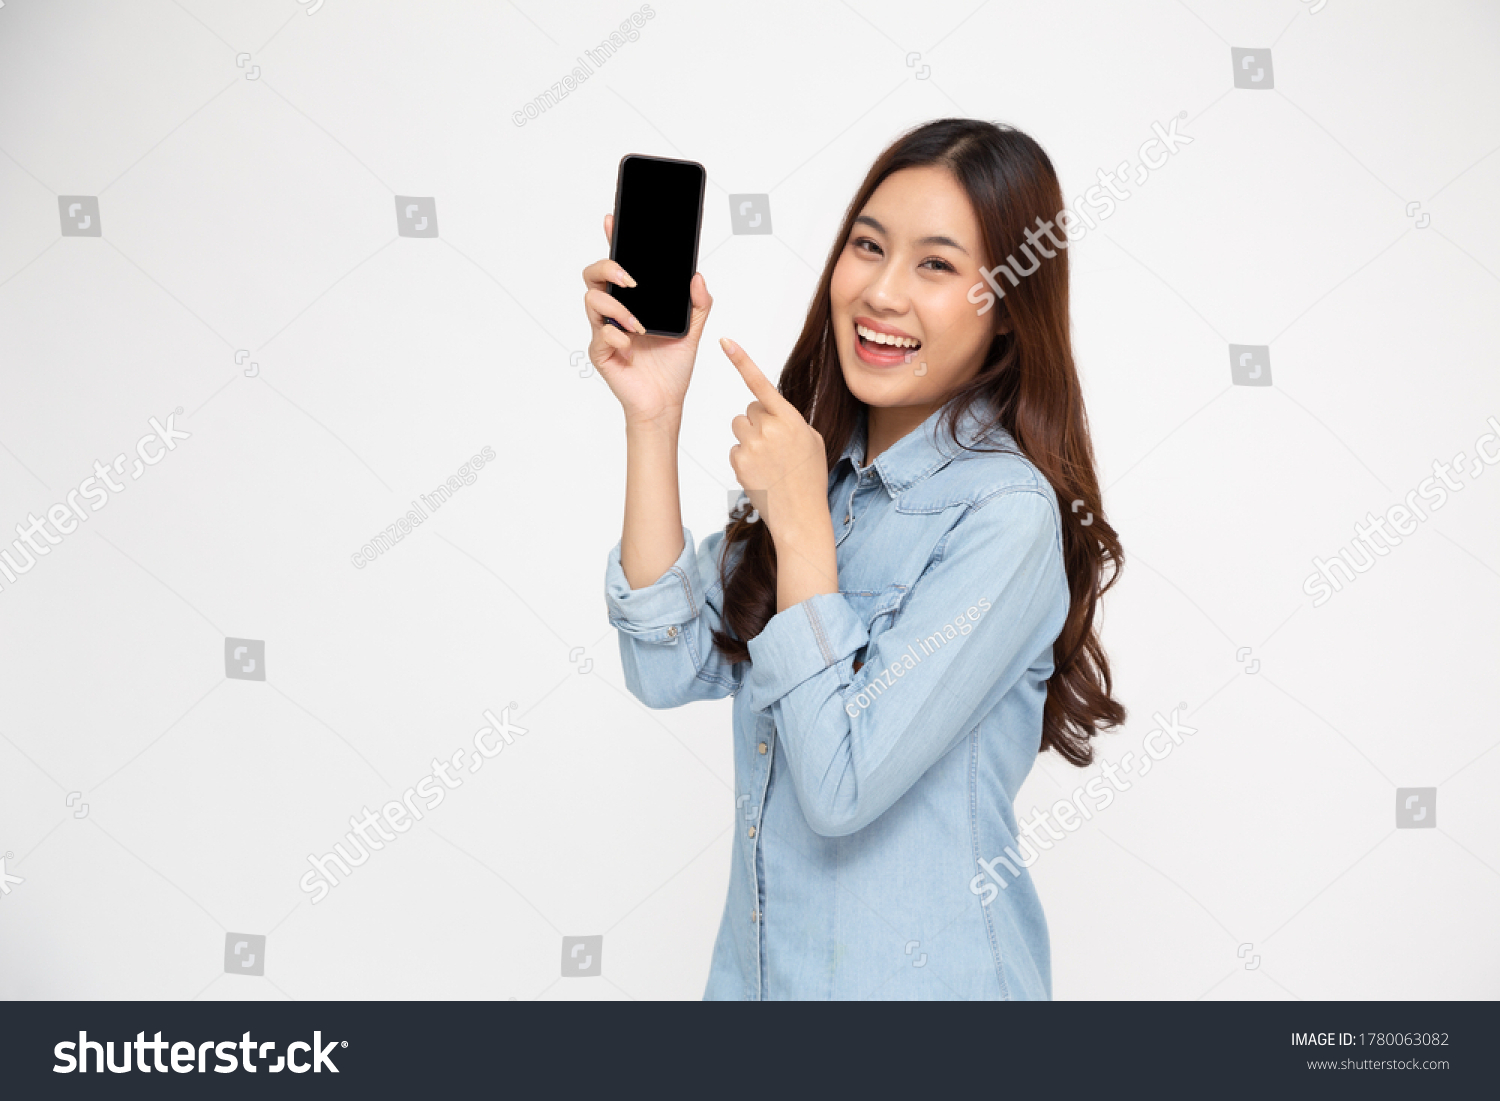 Portrait of Asian woman showing or presenting mobile phone application and pointing finger to smartphone on hand isolated over white background, Asian Thai model #1780063082